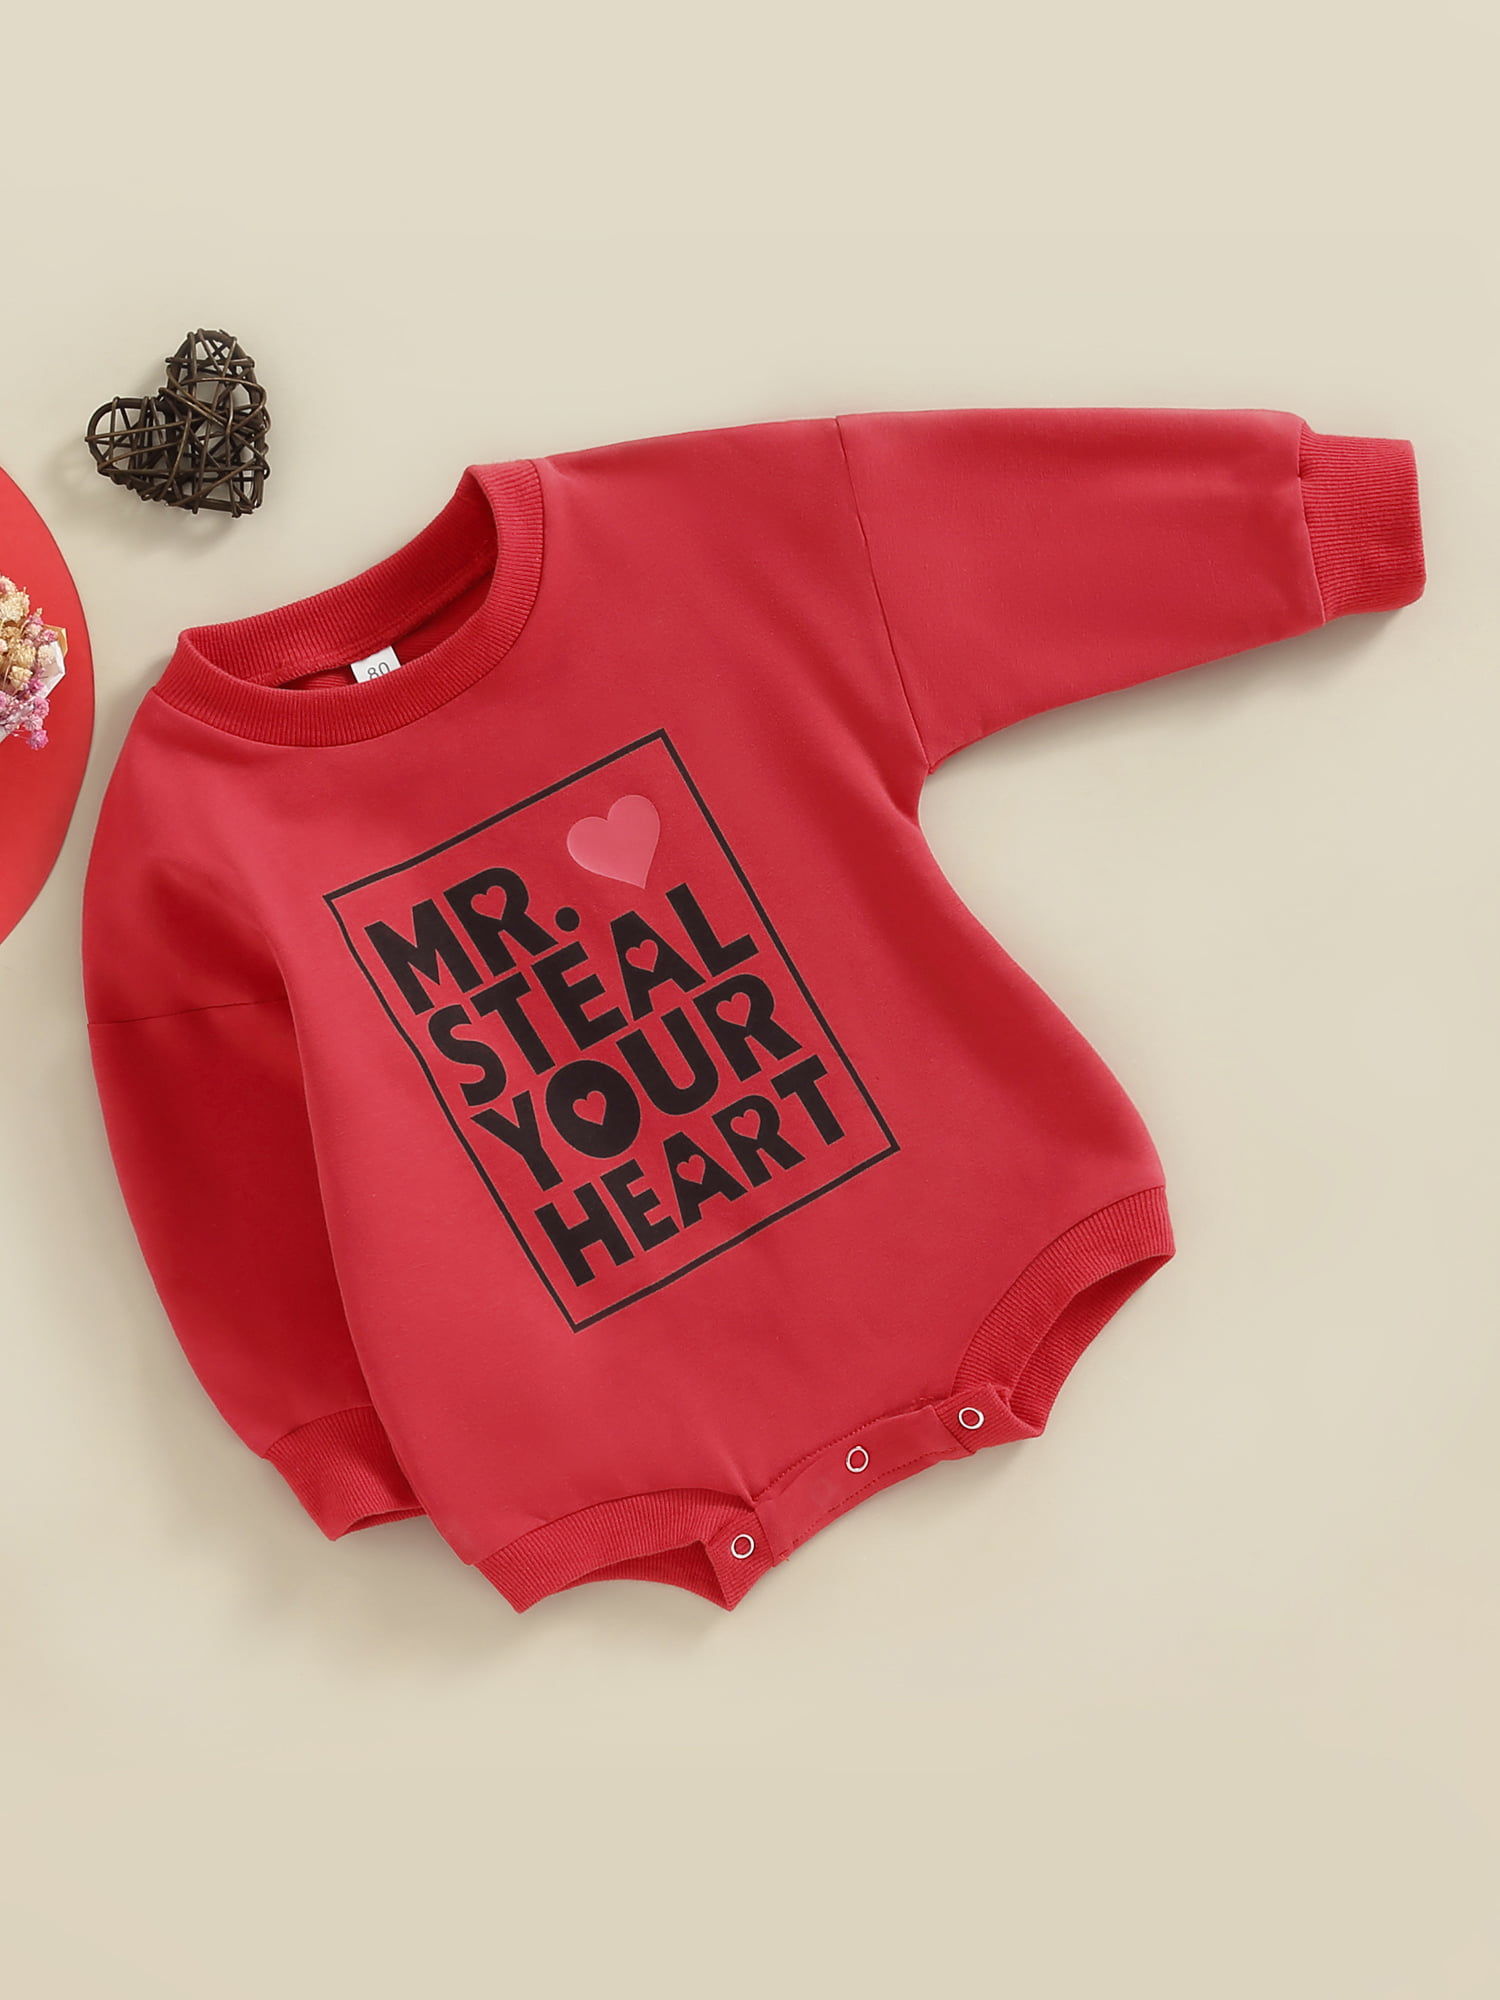 Aunavey Toddler Baby Boys Girls Valentine's Day Sweatshirt MR. Steal Your  Heart Pullover Spring Clothes Top